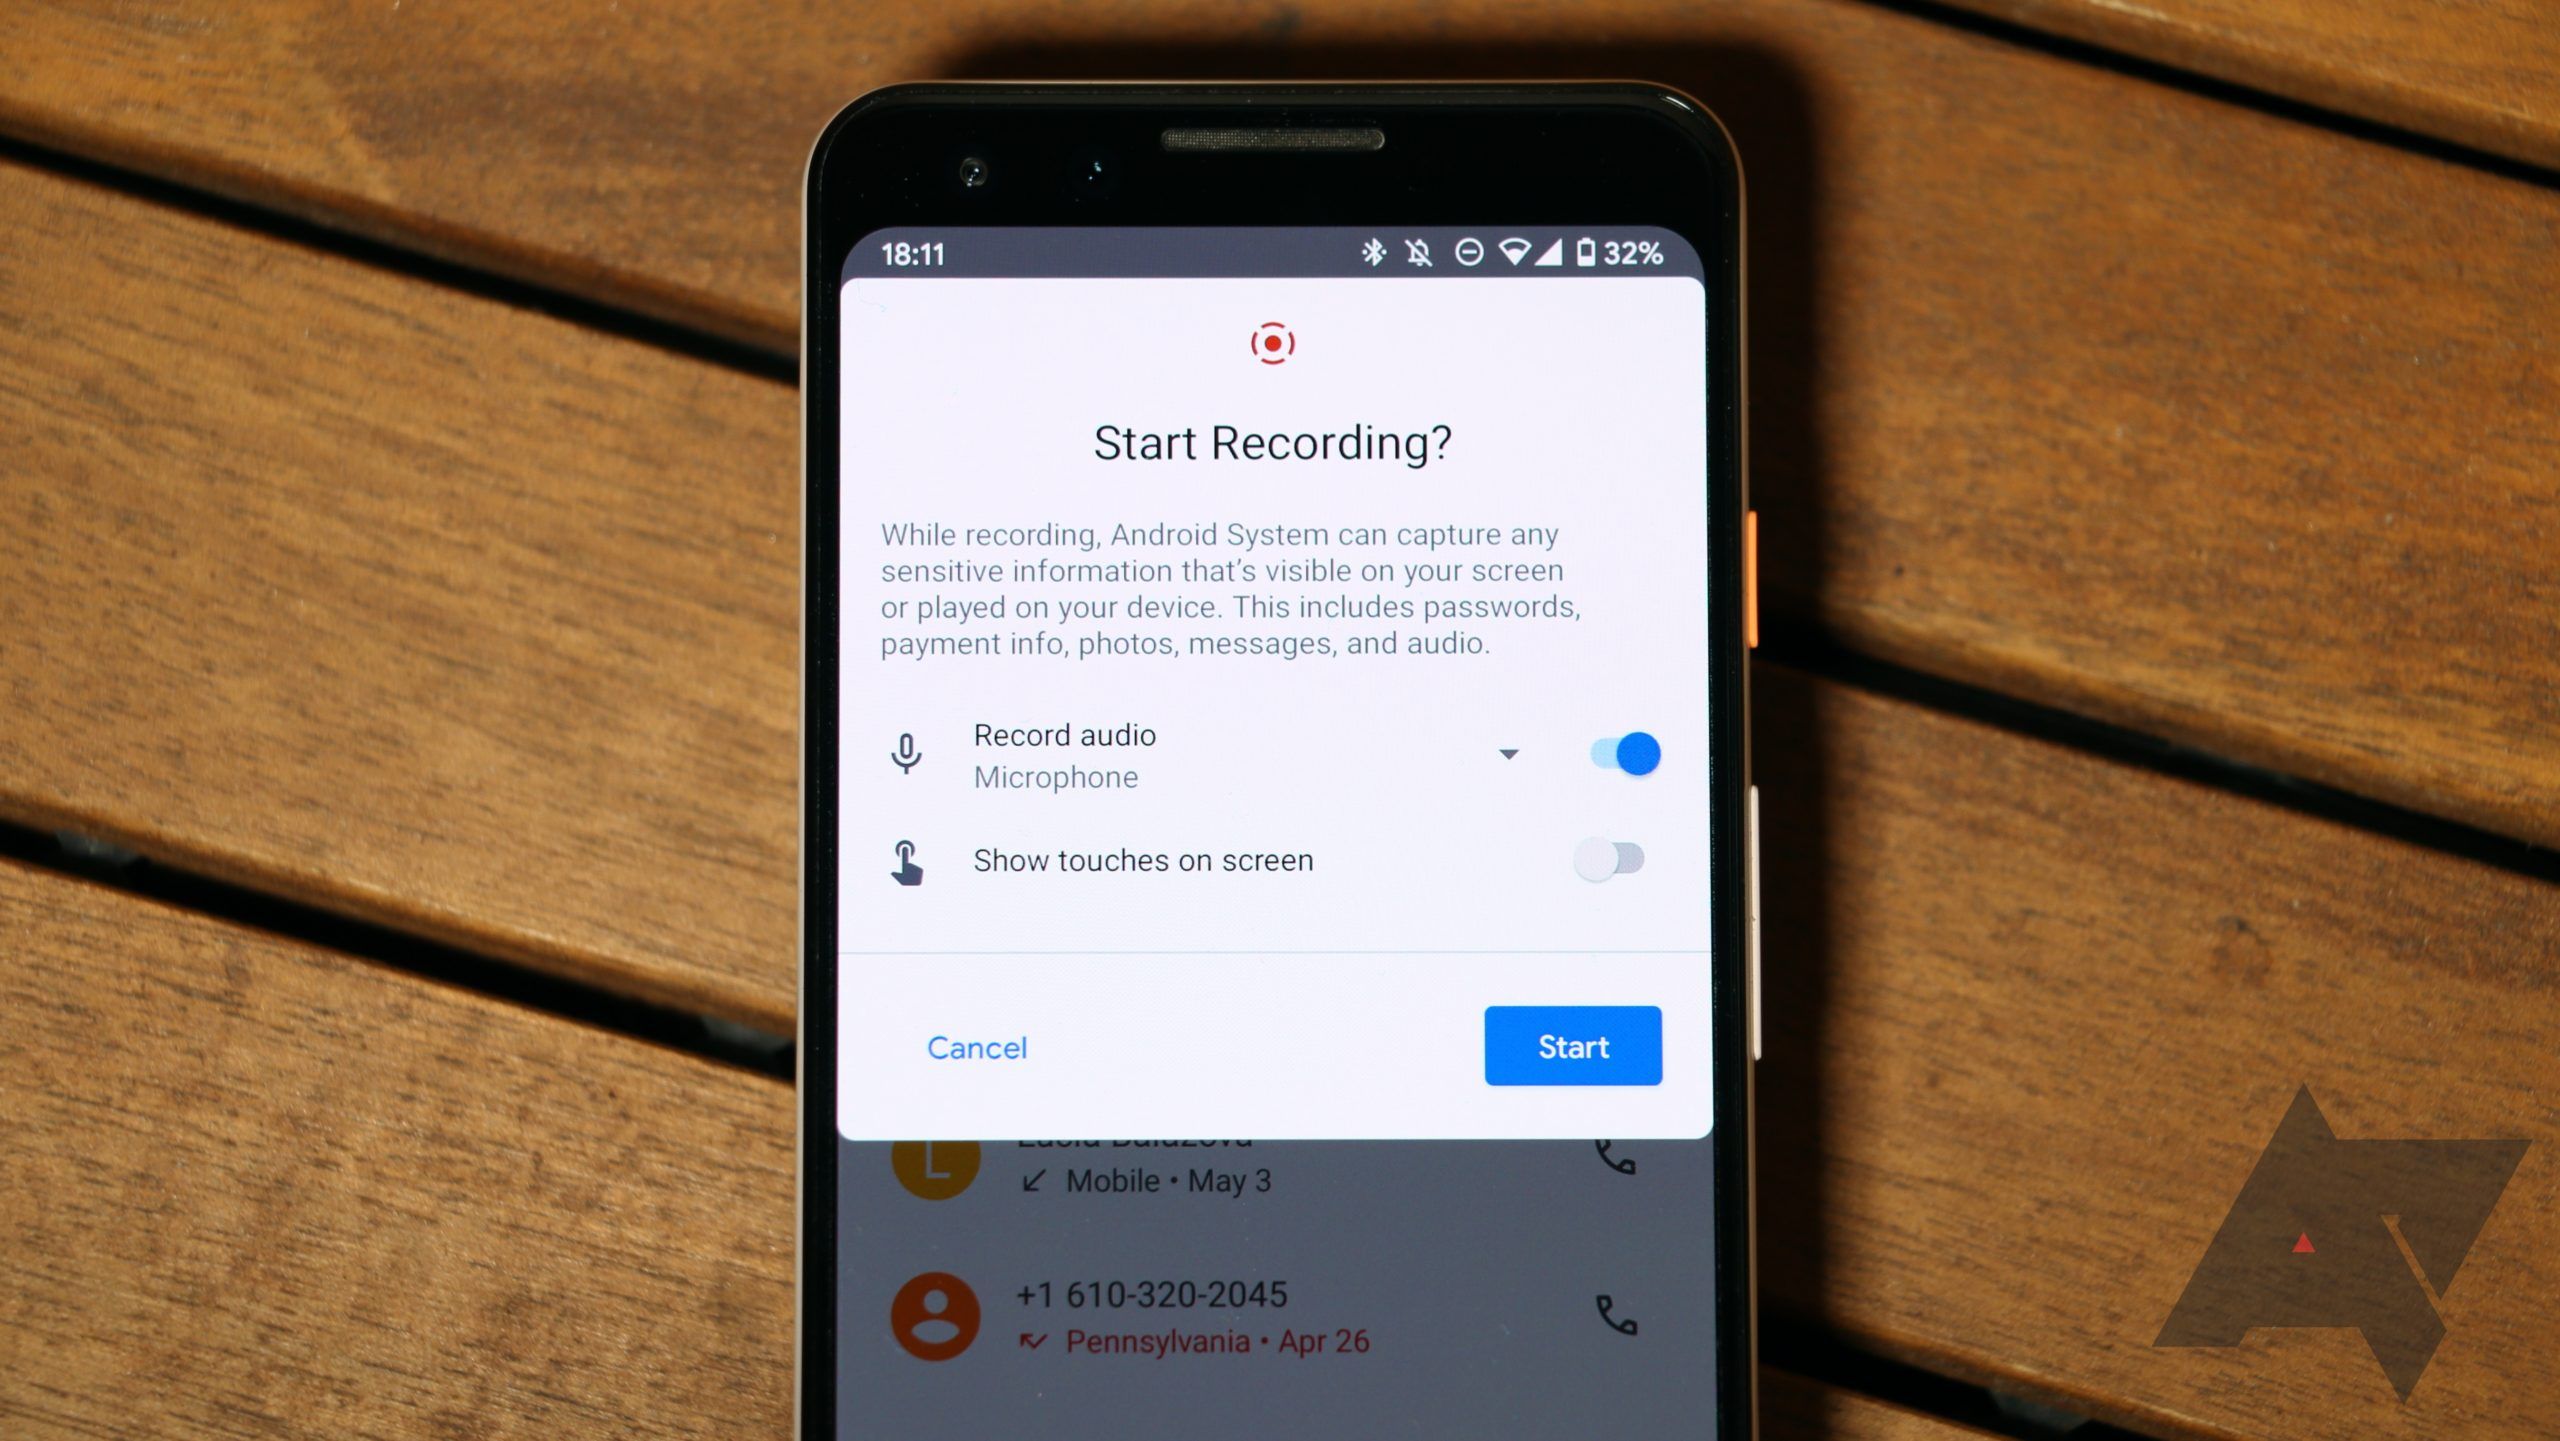 Tip: Android 11's built-in screen recorder also works for voice calls